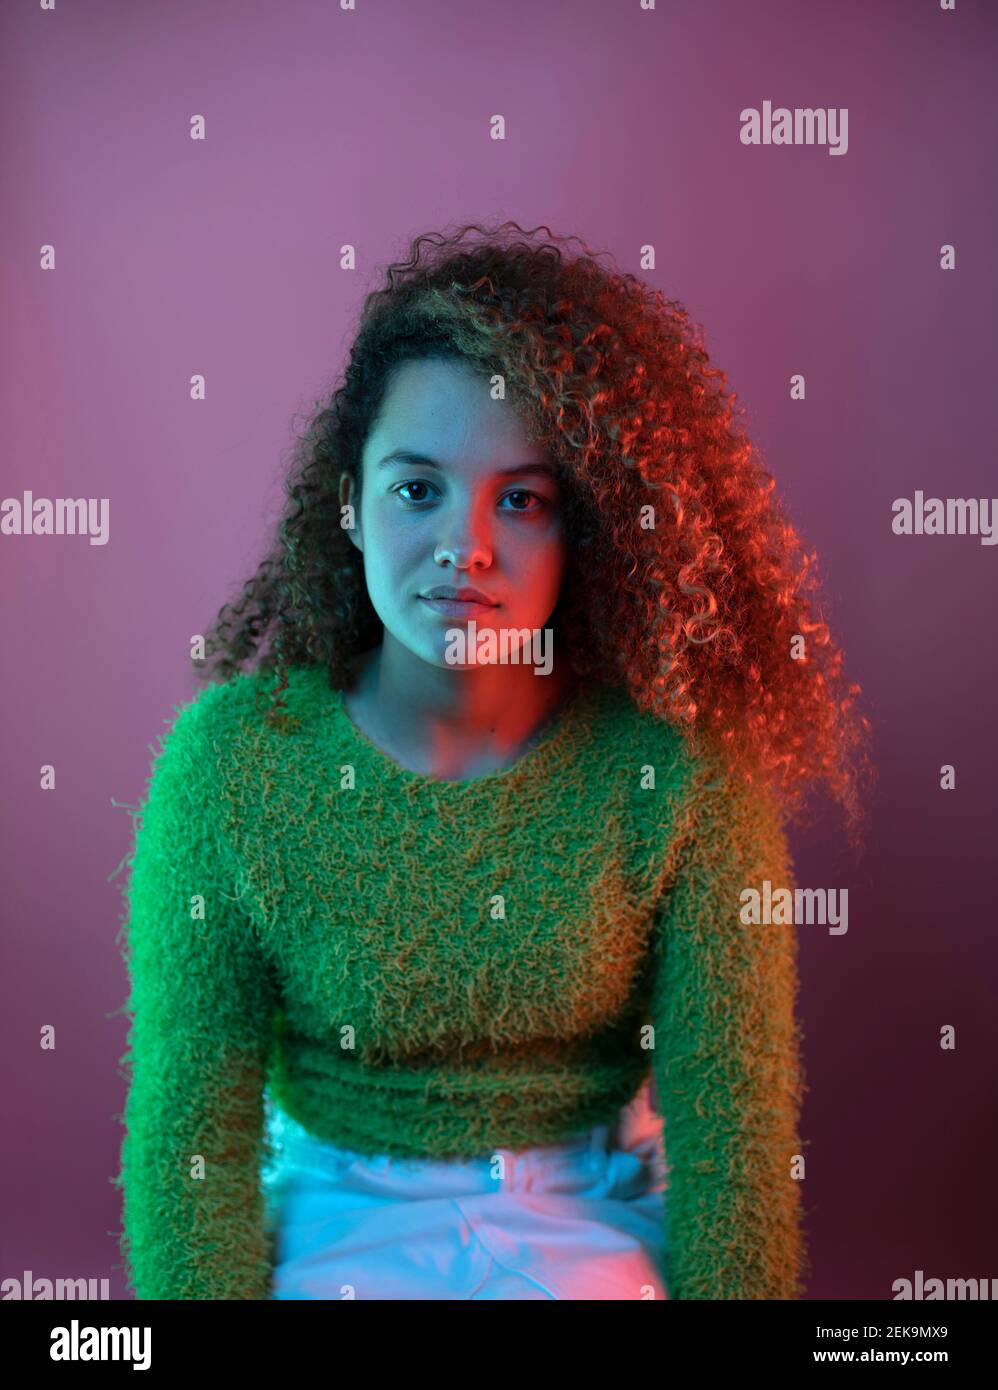 Red light on fashionable woman with curly hair sitting against pink background Stock Photo